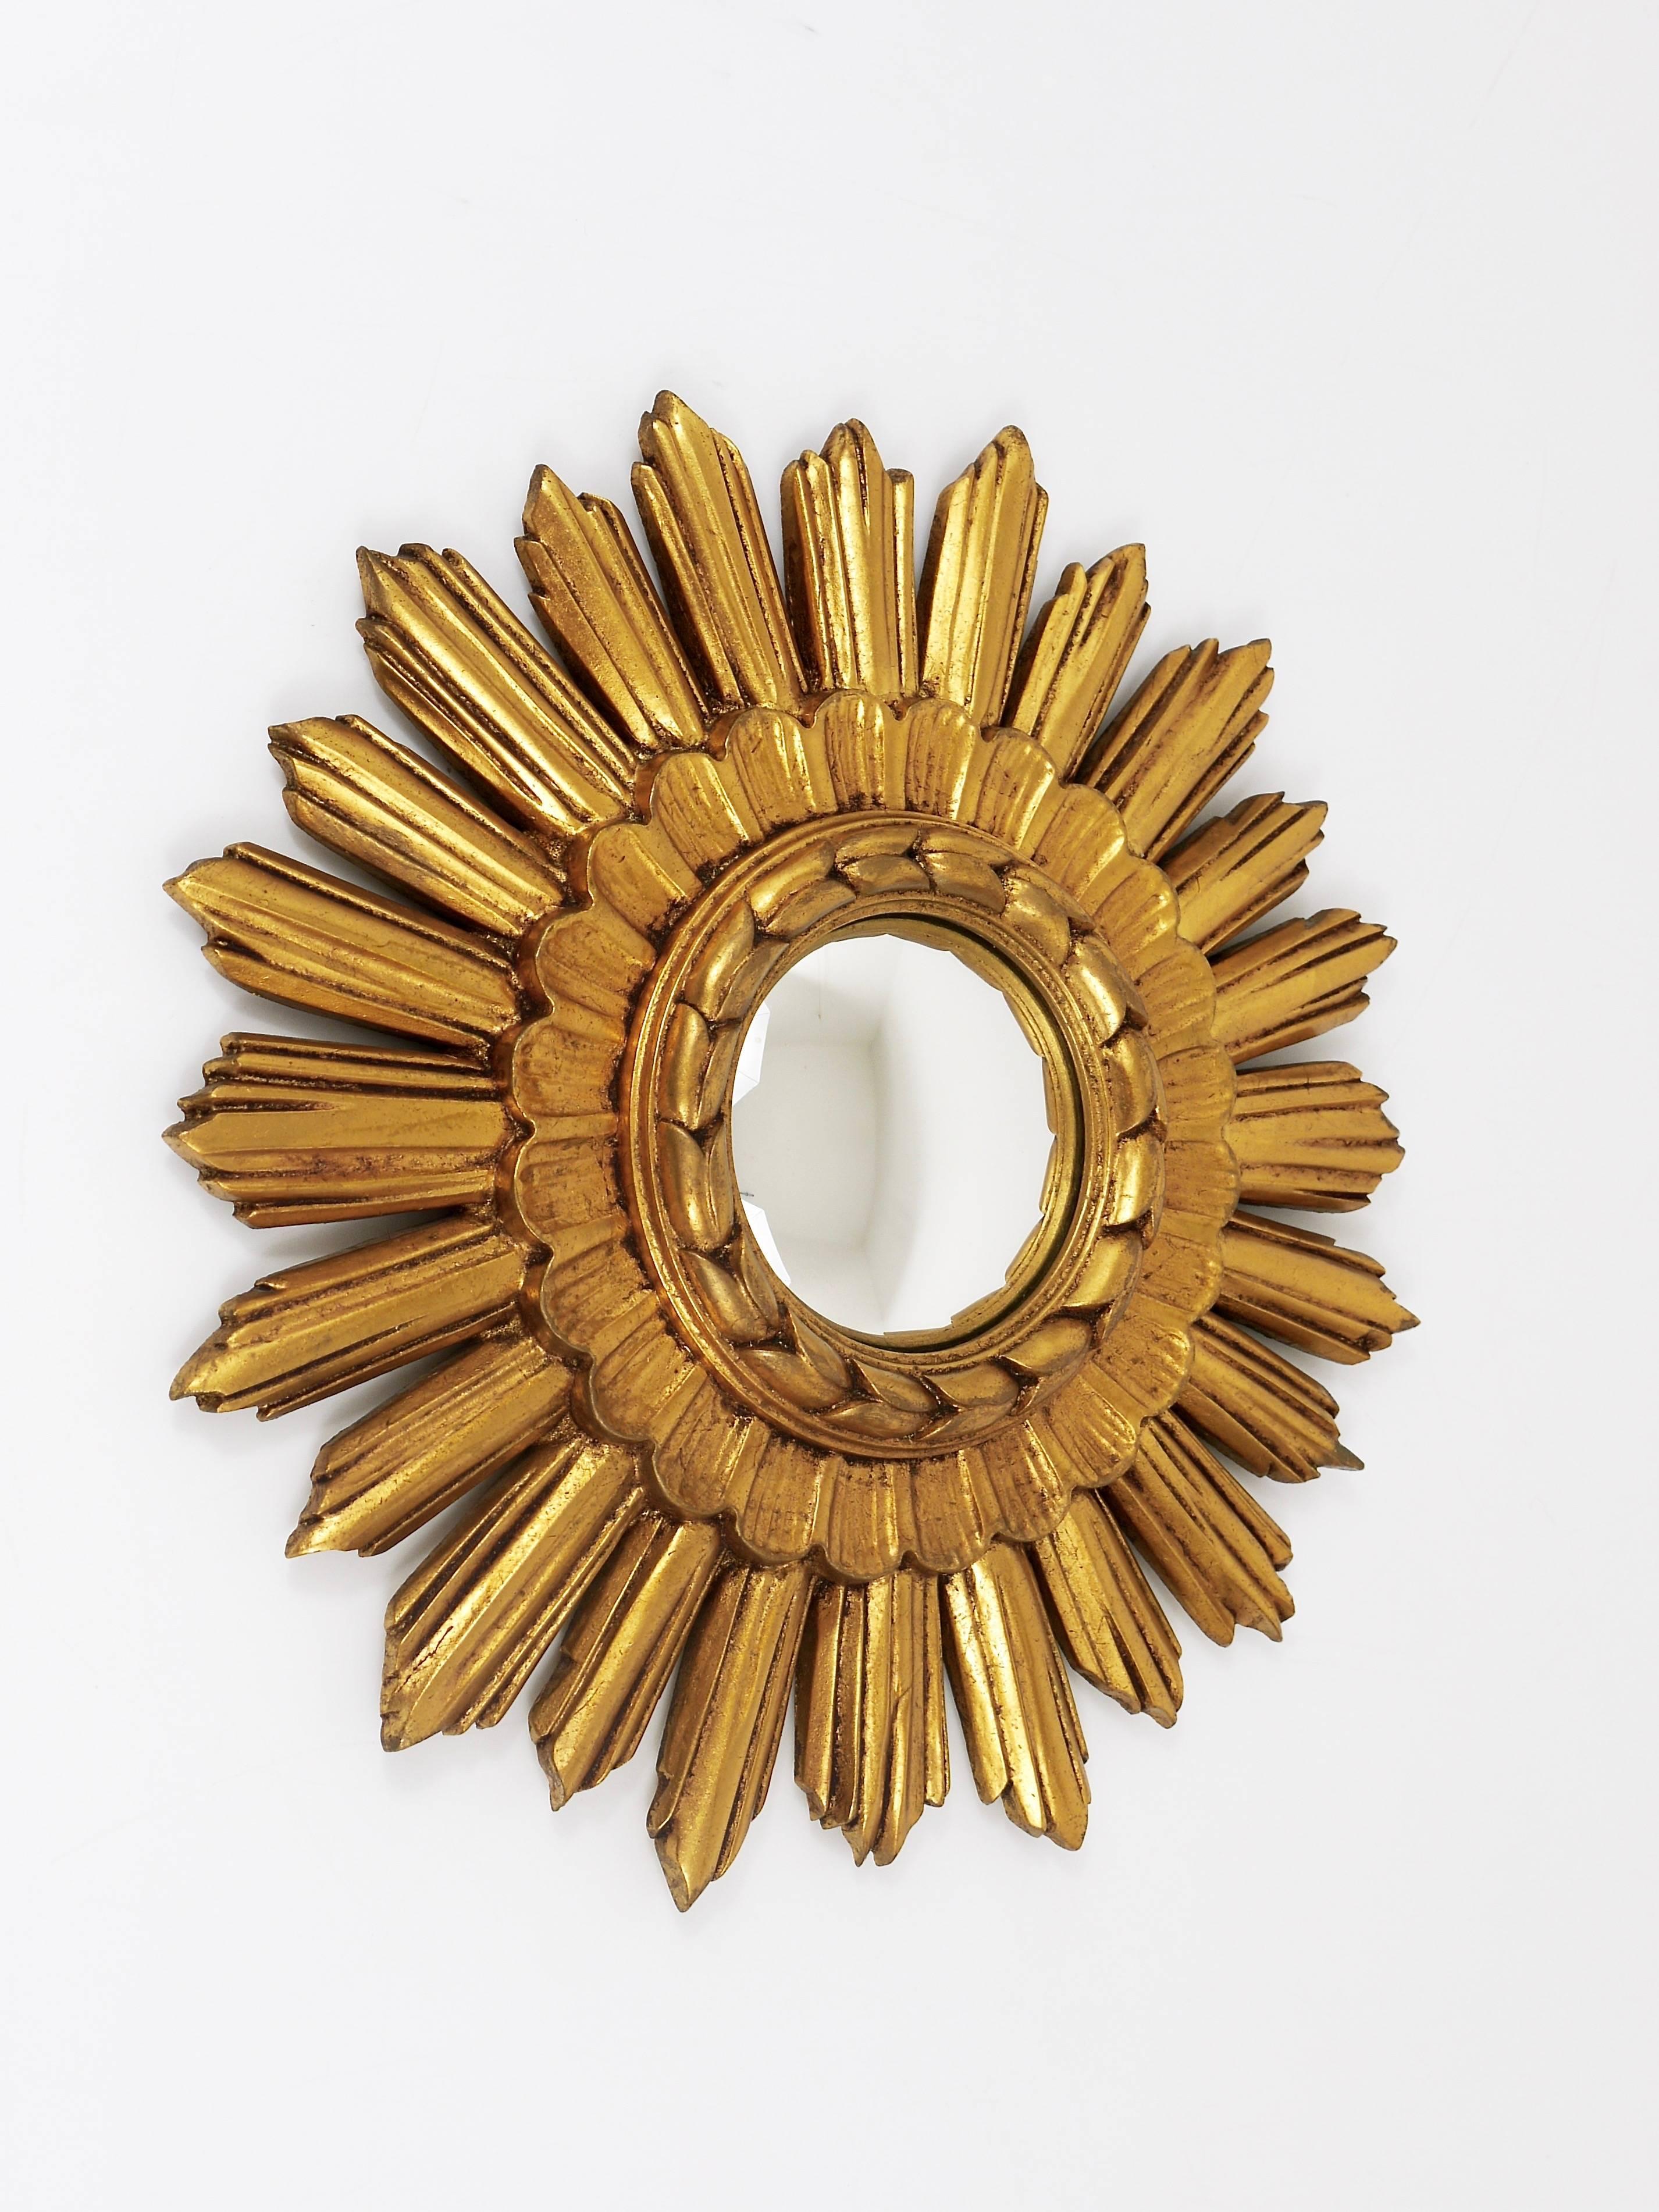 Resin French Gilt Convex Sunburst Starburst Wall Mirror from the 1950s